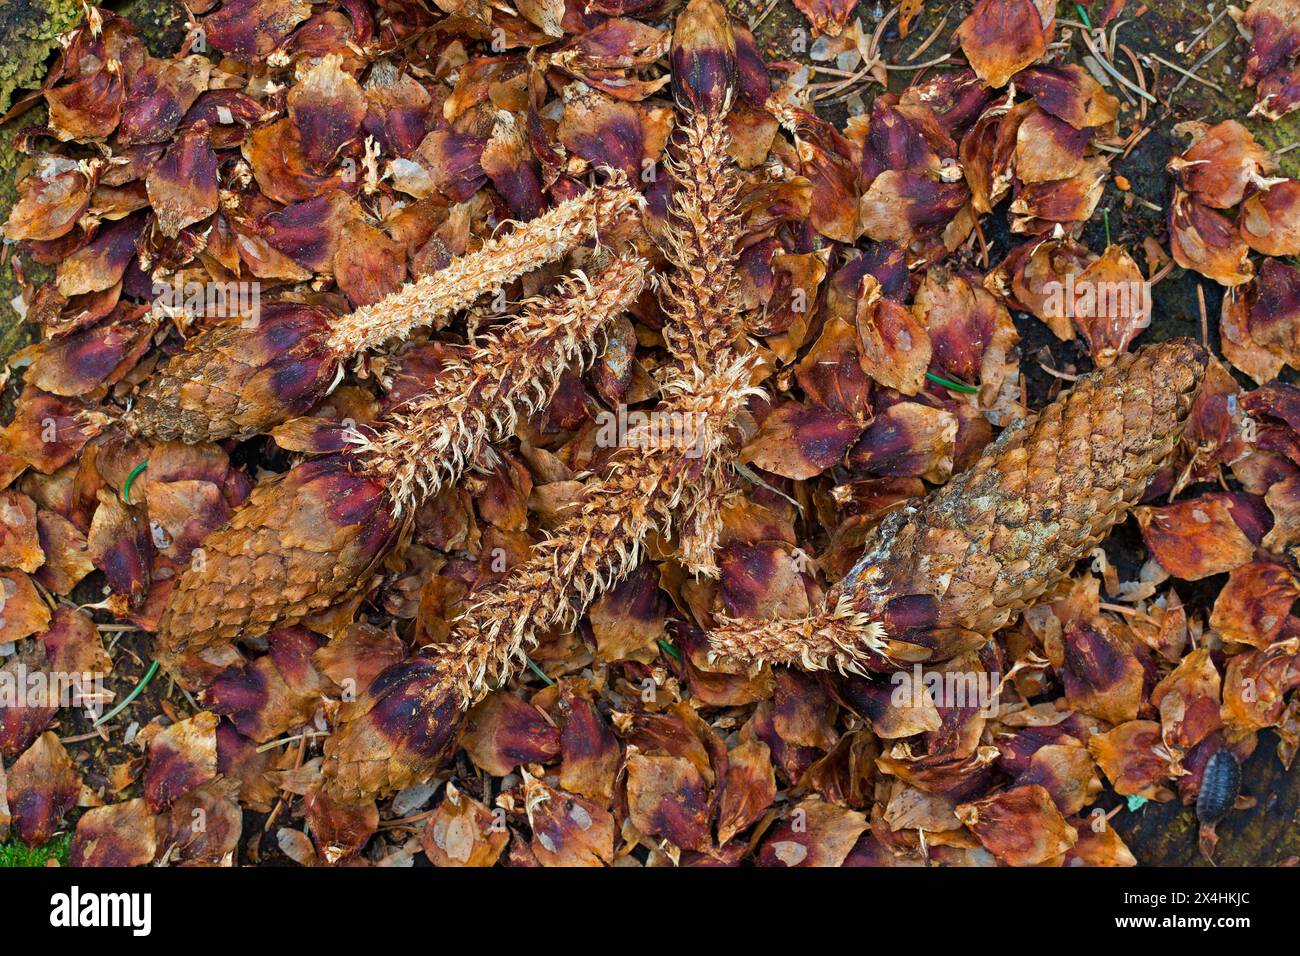 Stripped scales and partially eaten cones of Norway spruce / European spruce on tree stump, leftover of red squirrel eating seeds in coniferous forest Stock Photo